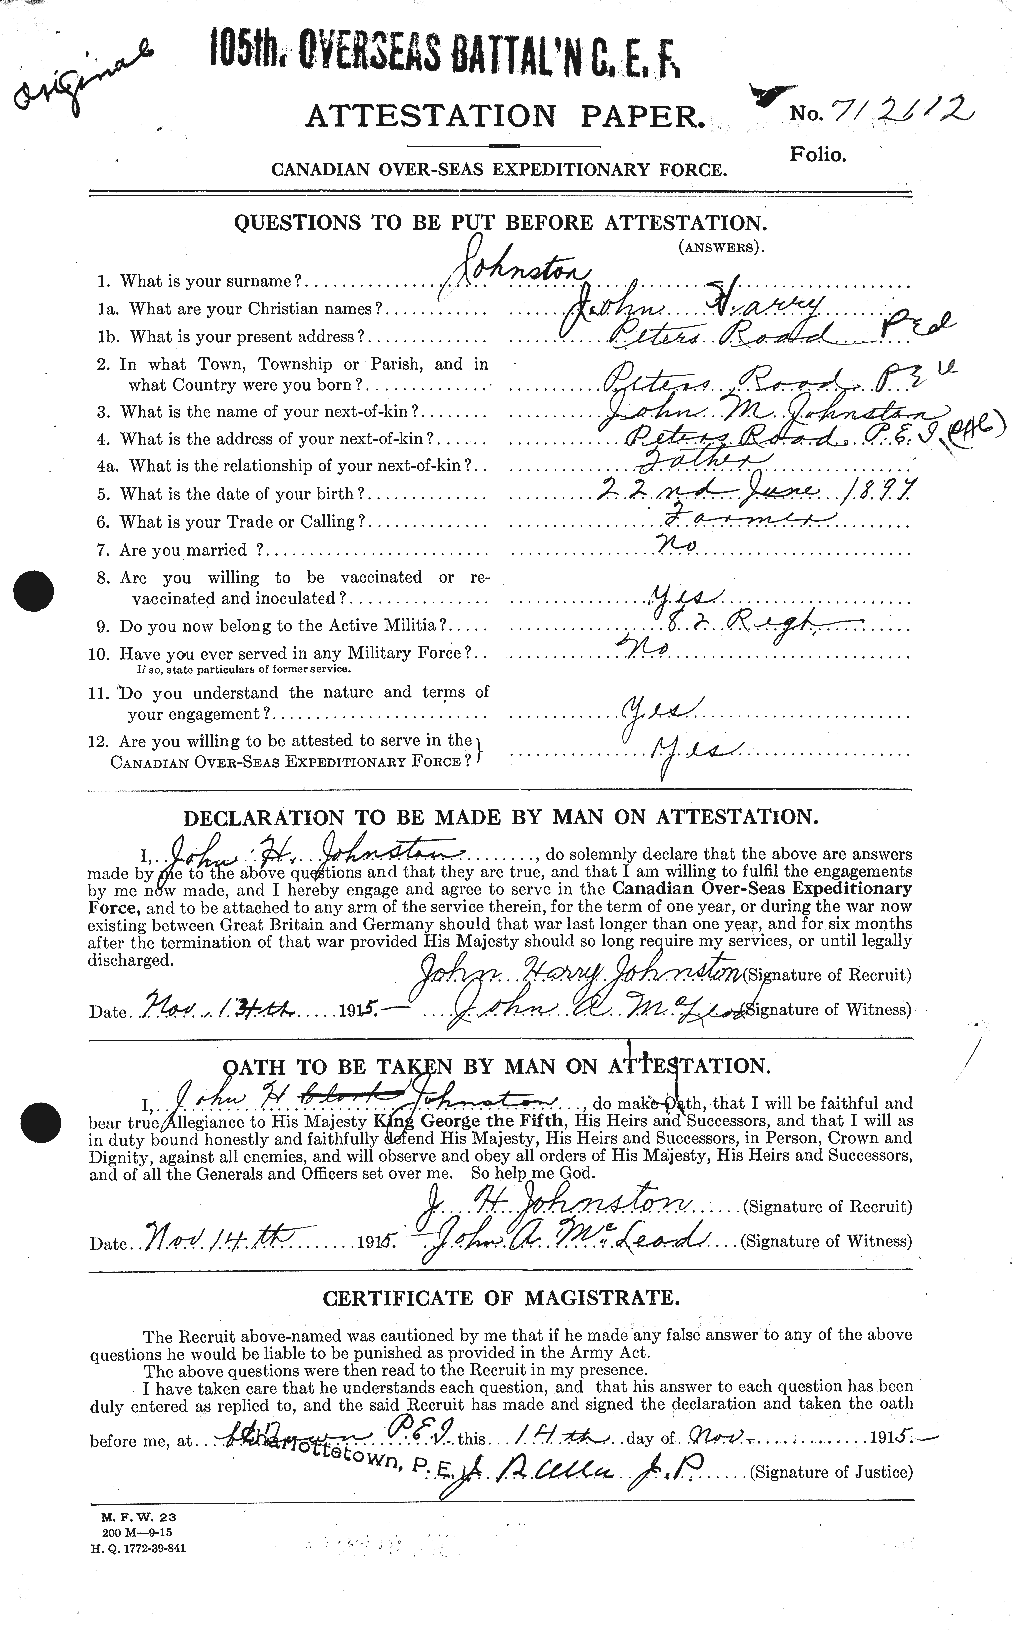 Personnel Records of the First World War - CEF 422837a